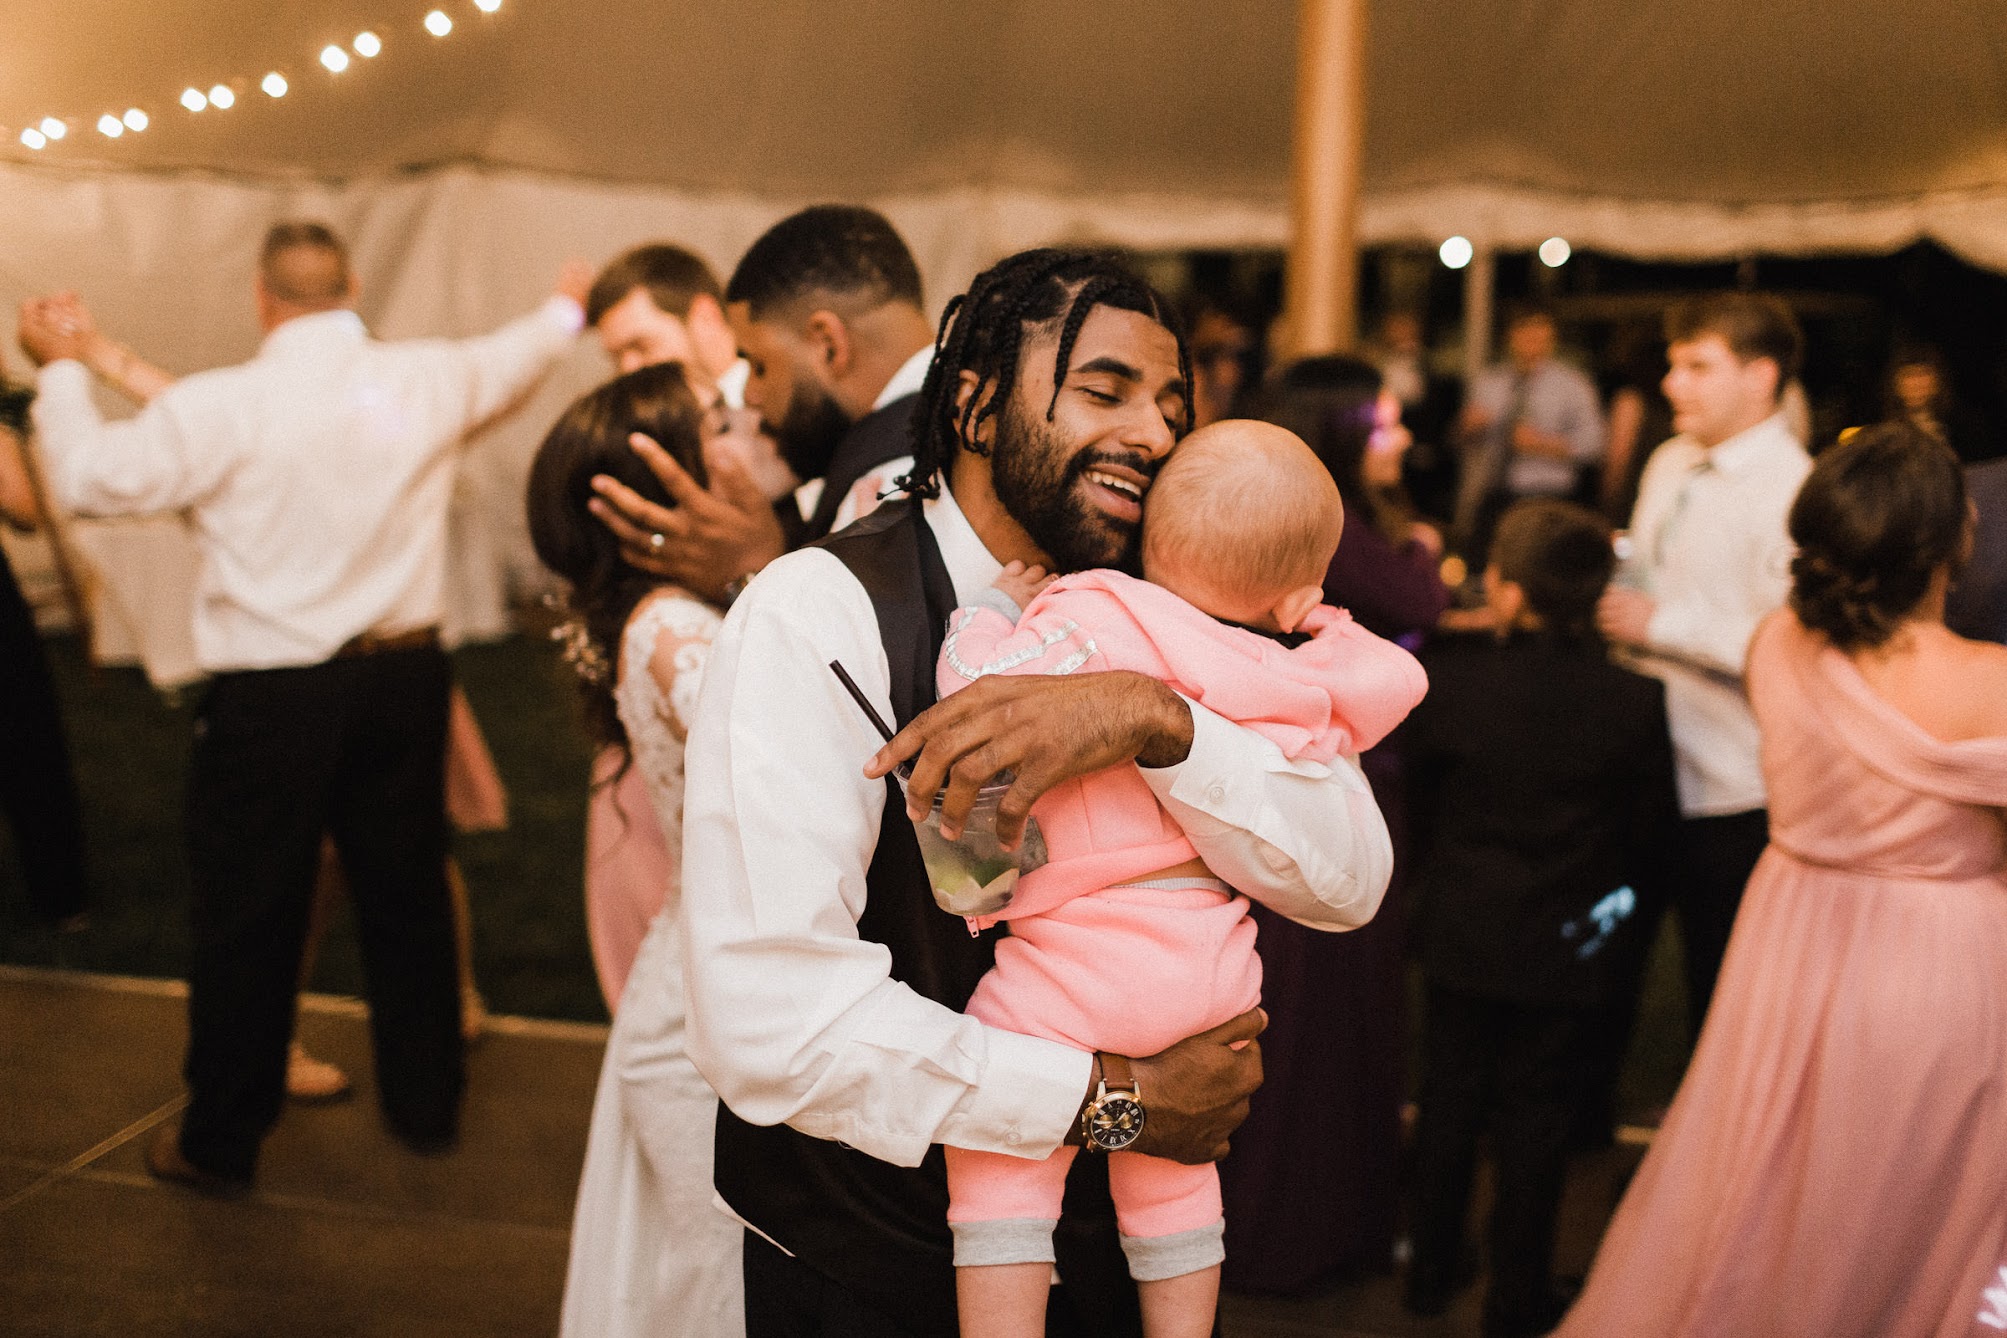 A groomsmen dancing with his baby 